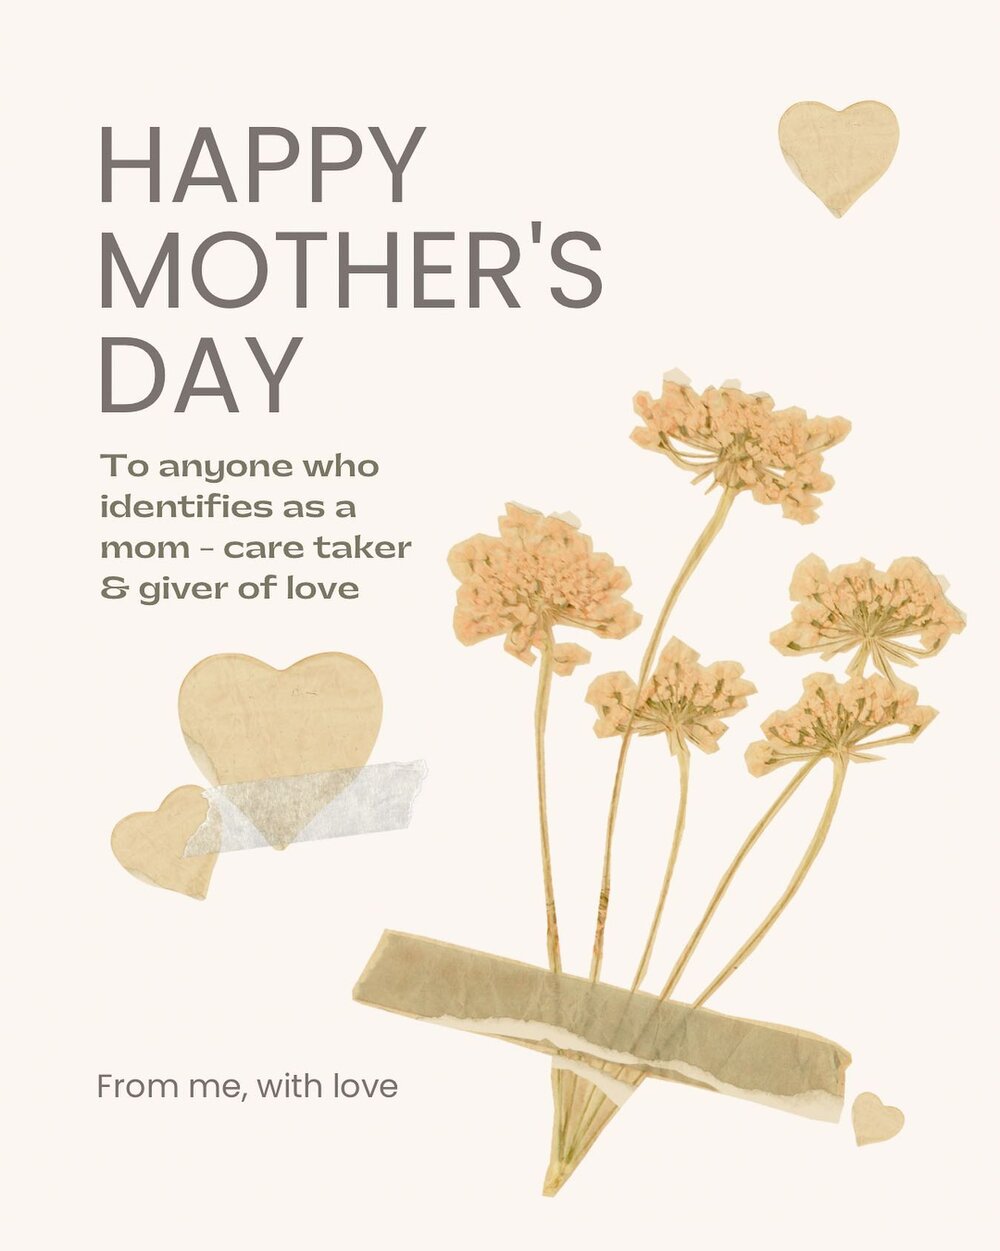 I&rsquo;m a day late Australian time and right on the money US time - Happy Mothers Day.
.
I hesitated on whether to post or not as for some Mother&rsquo;s Day is a beautiful celebratory day. For others it&rsquo;s a reminder of their all consuming st